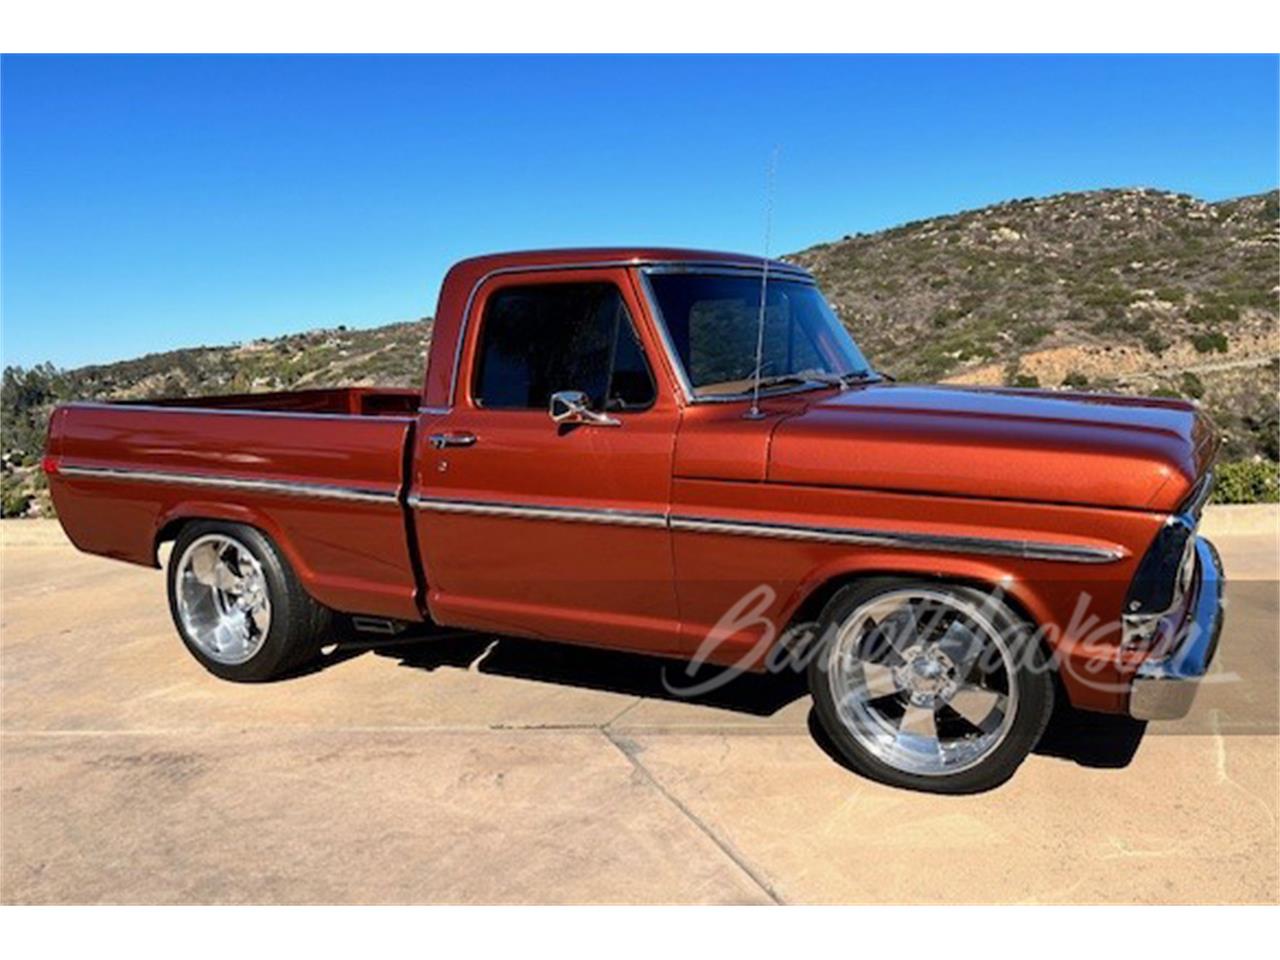 For Sale at Auction: 1972 Ford F100 in Scottsdale, Arizona for sale in Scottsdale, AZ